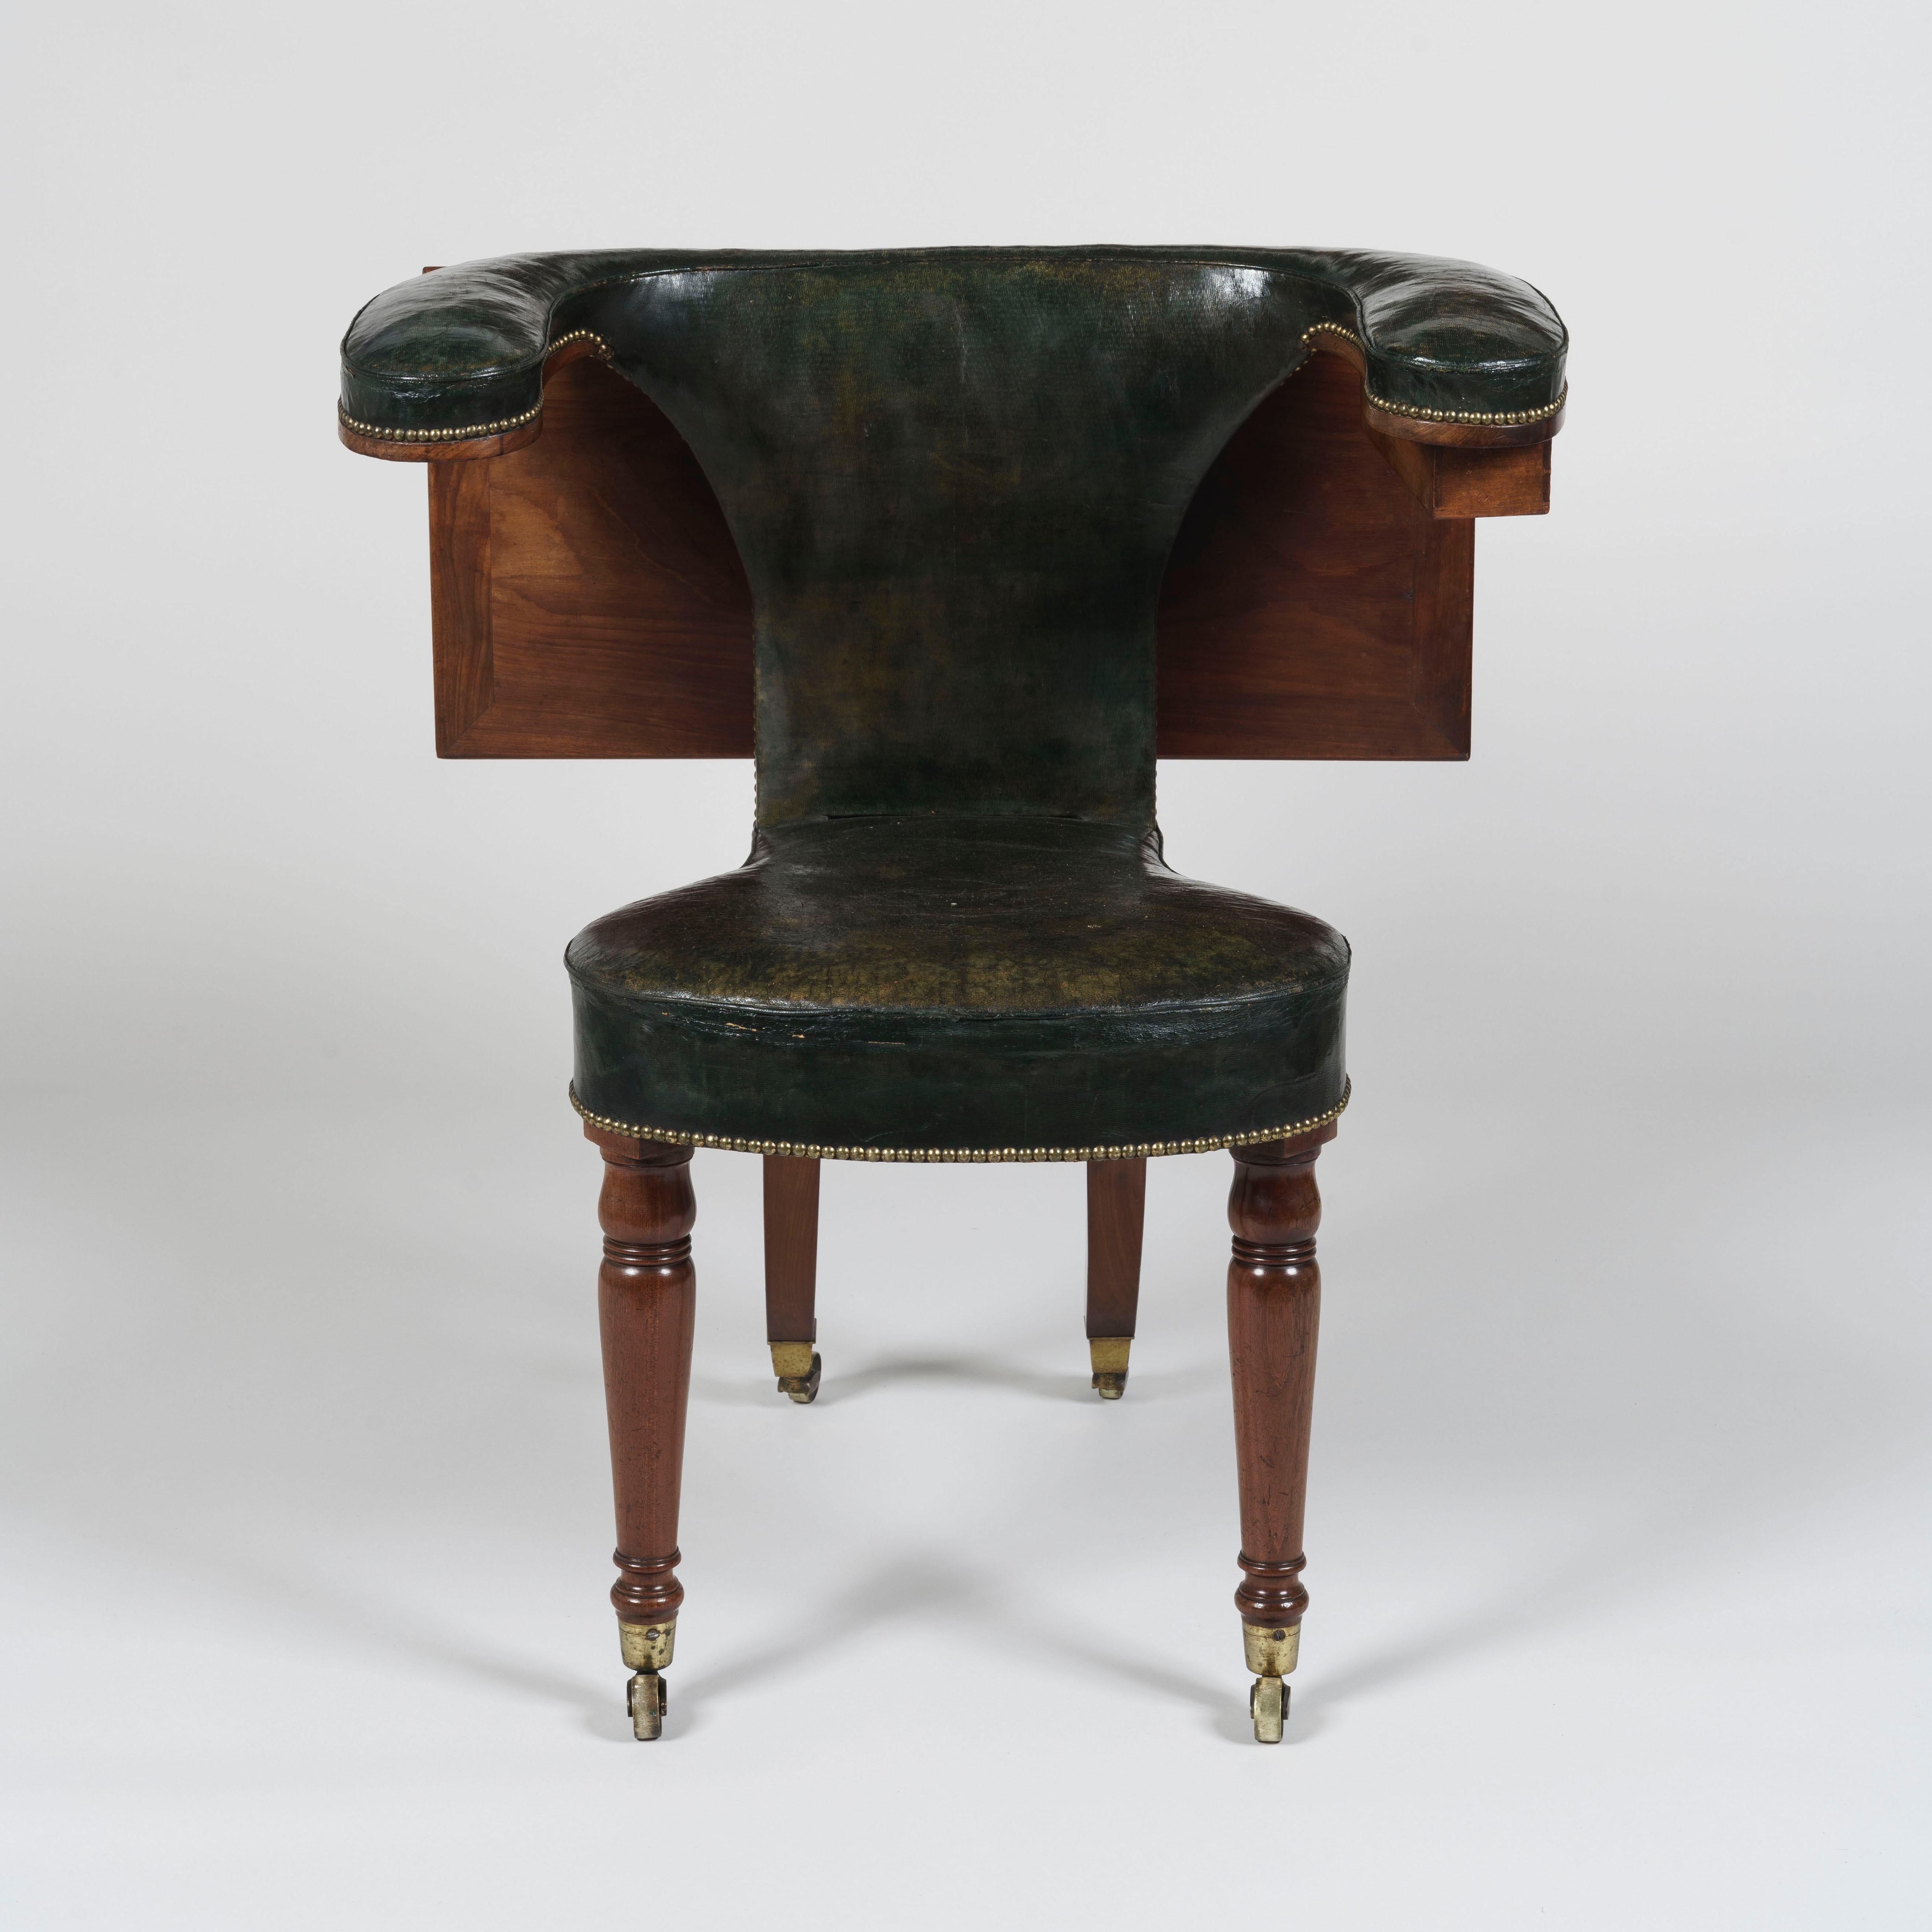 A mahogany reading chair
After a design by Thomas Sheraton

Of most striking design, the mahogany chair with its original leather upholstery having castor-shod tapering and turned front legs with sabre legs to the rear, the bowfront seat